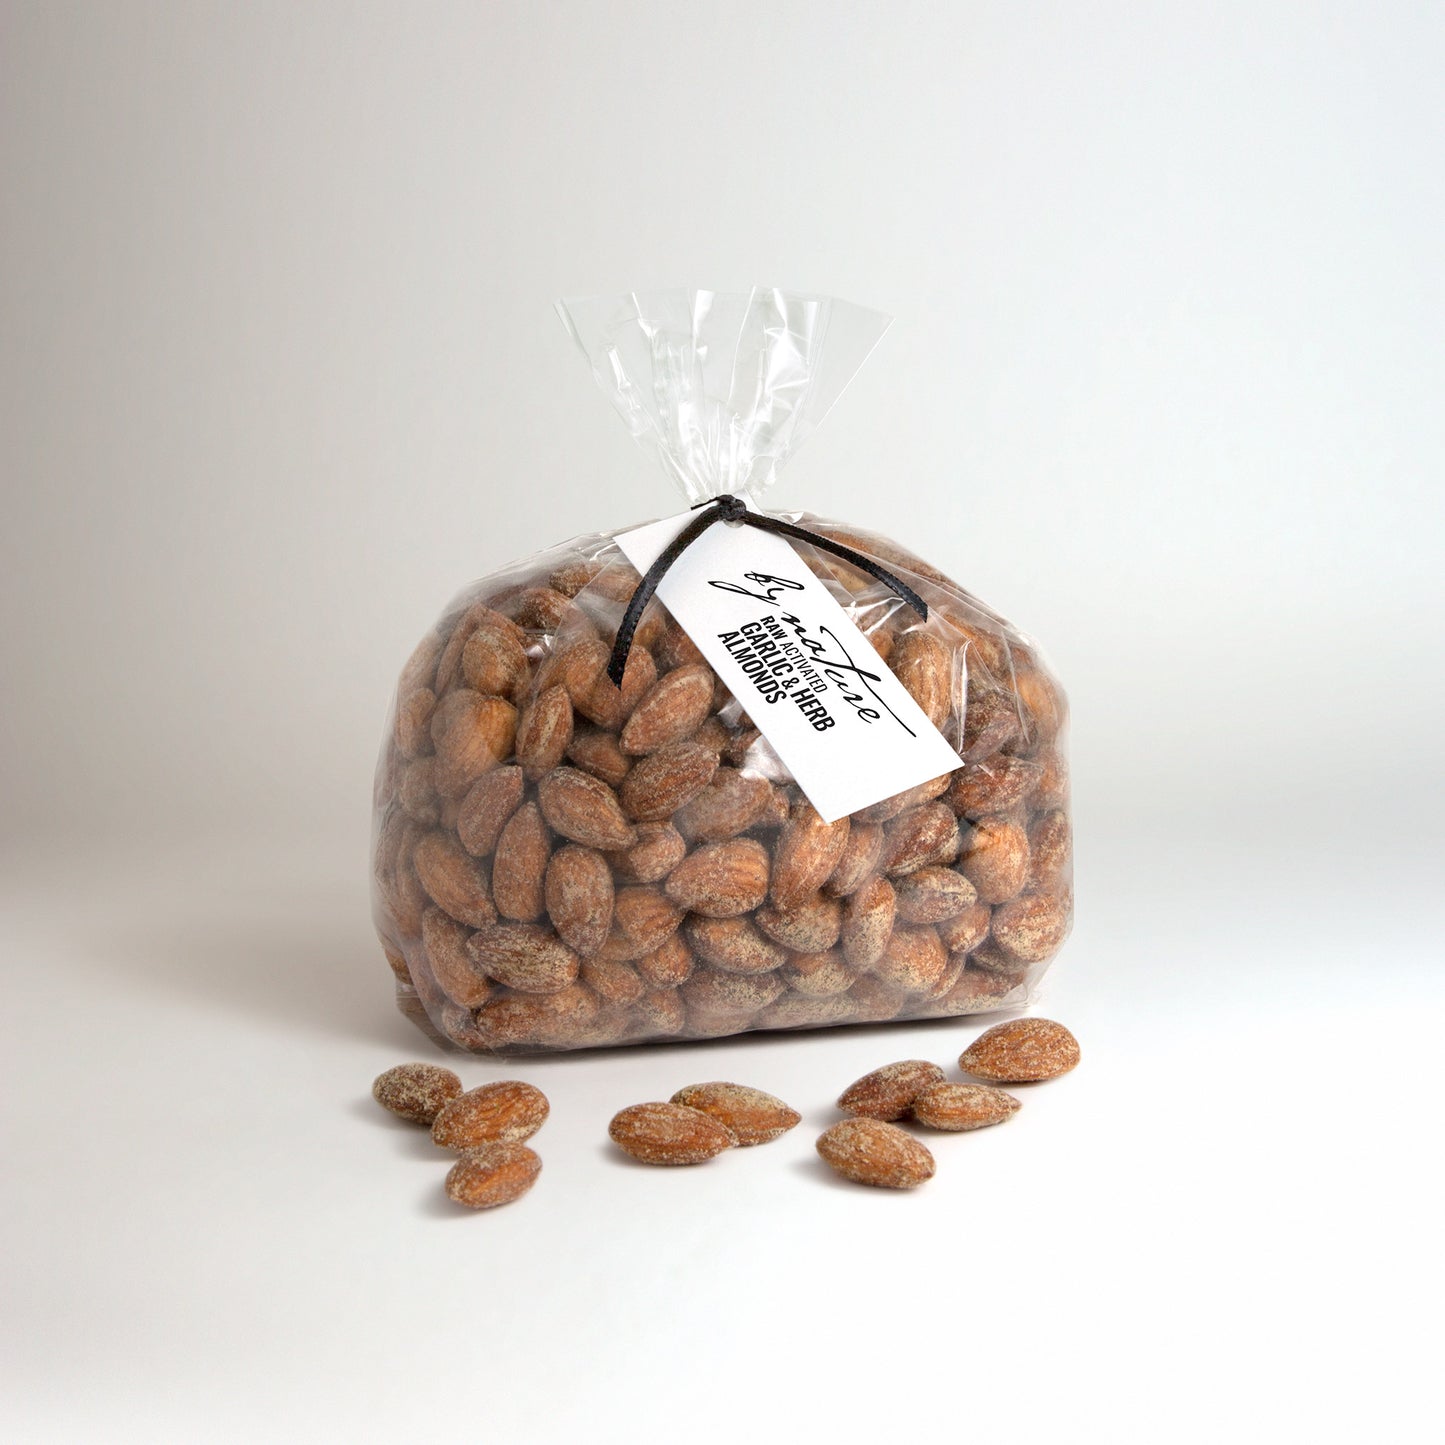 BY NATURE Garlic & Herb Almonds, 500g - raw, activated, dried not roasted.